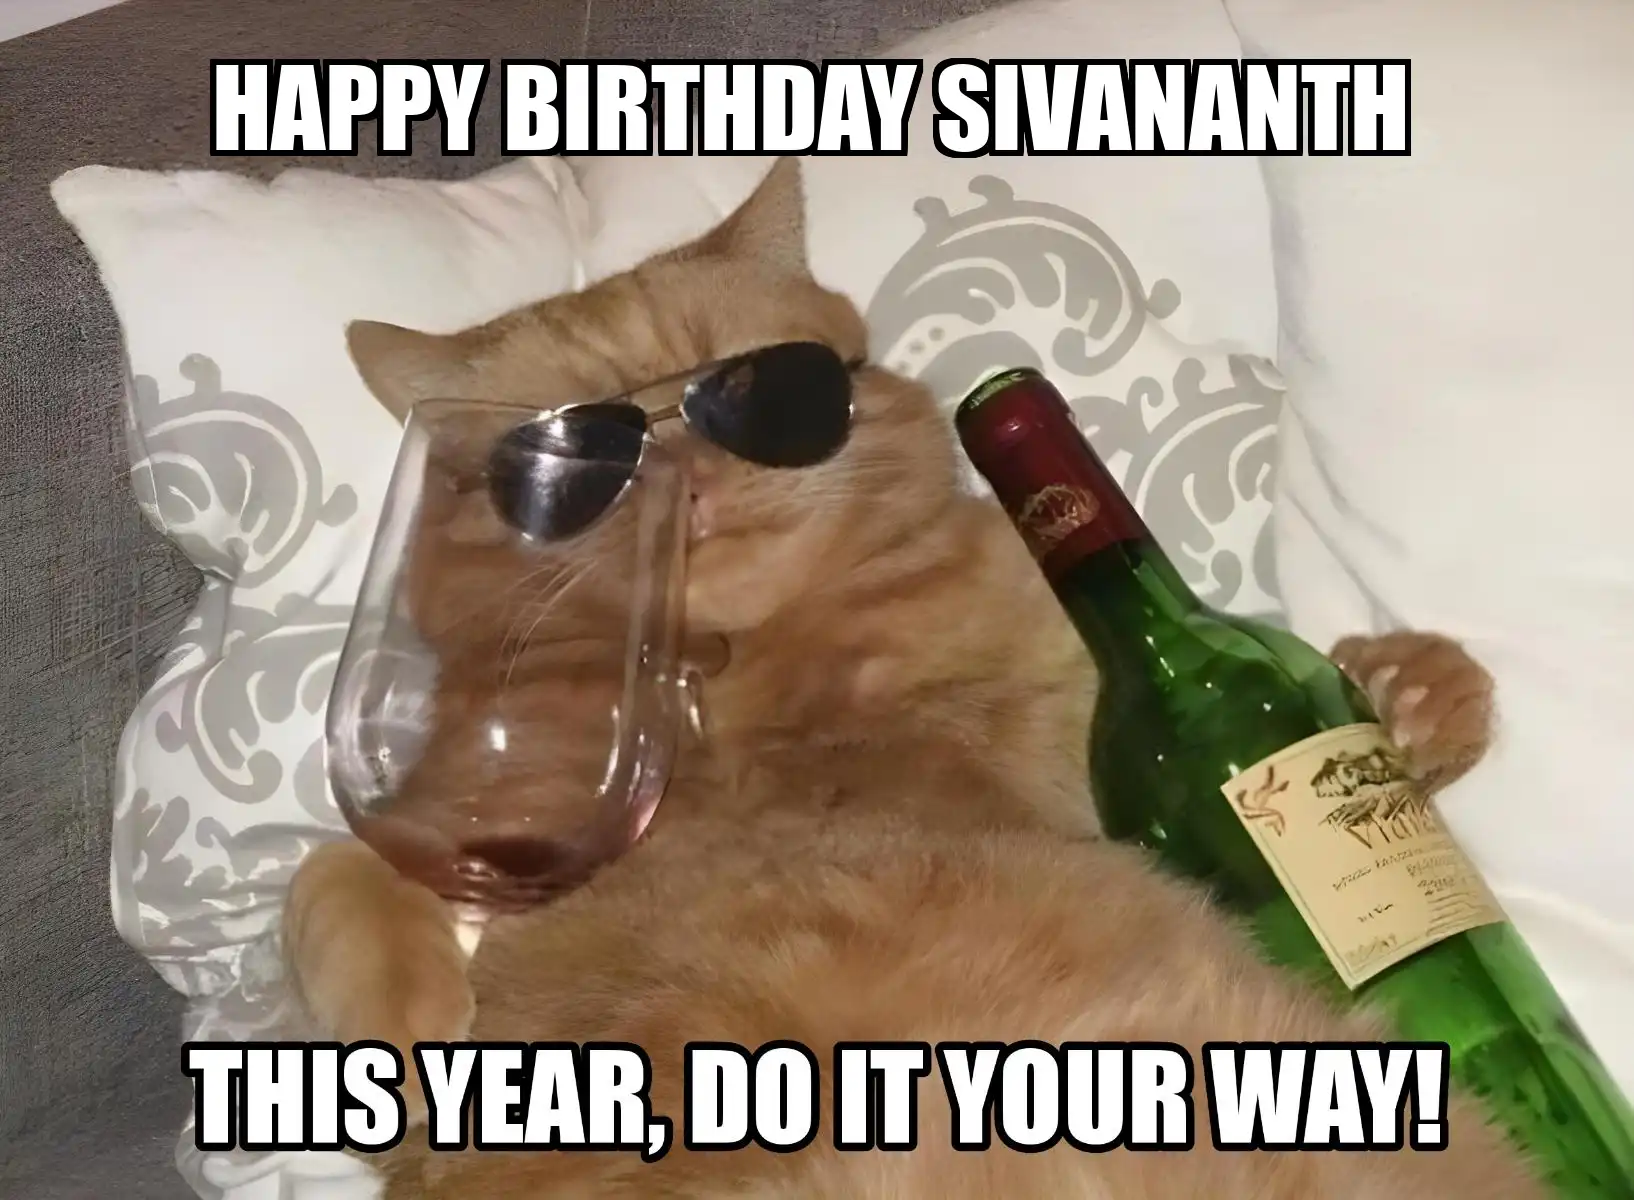 Happy Birthday Sivananth This Year Do It Your Way Meme